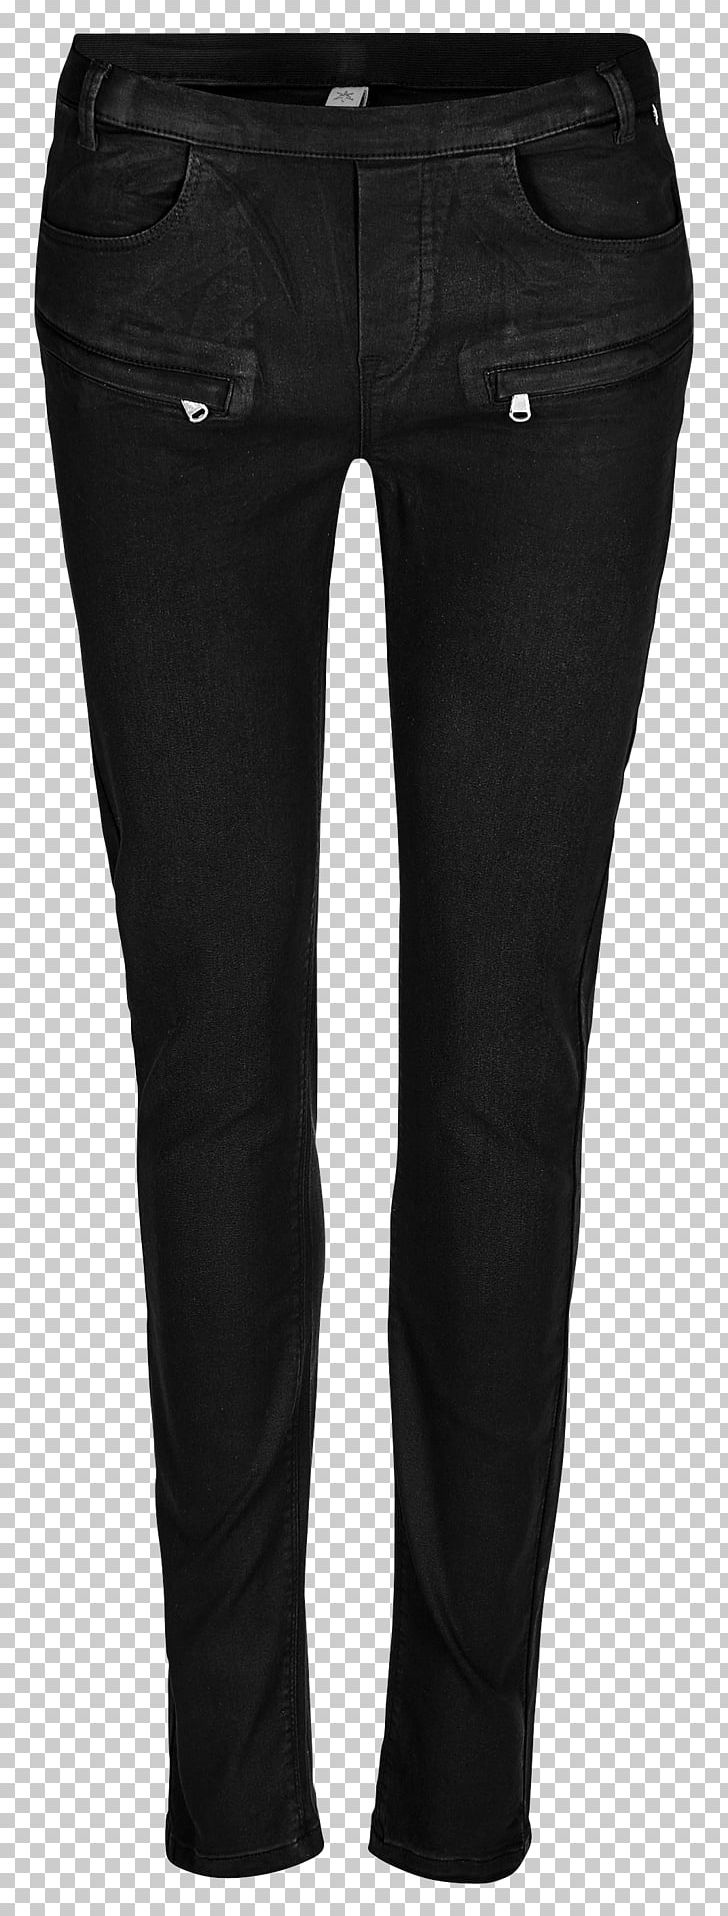 Jeans Tracksuit Clothing Pants Chino Cloth PNG, Clipart, Black, Black Pants, Canada, Chino Cloth, Clothing Free PNG Download